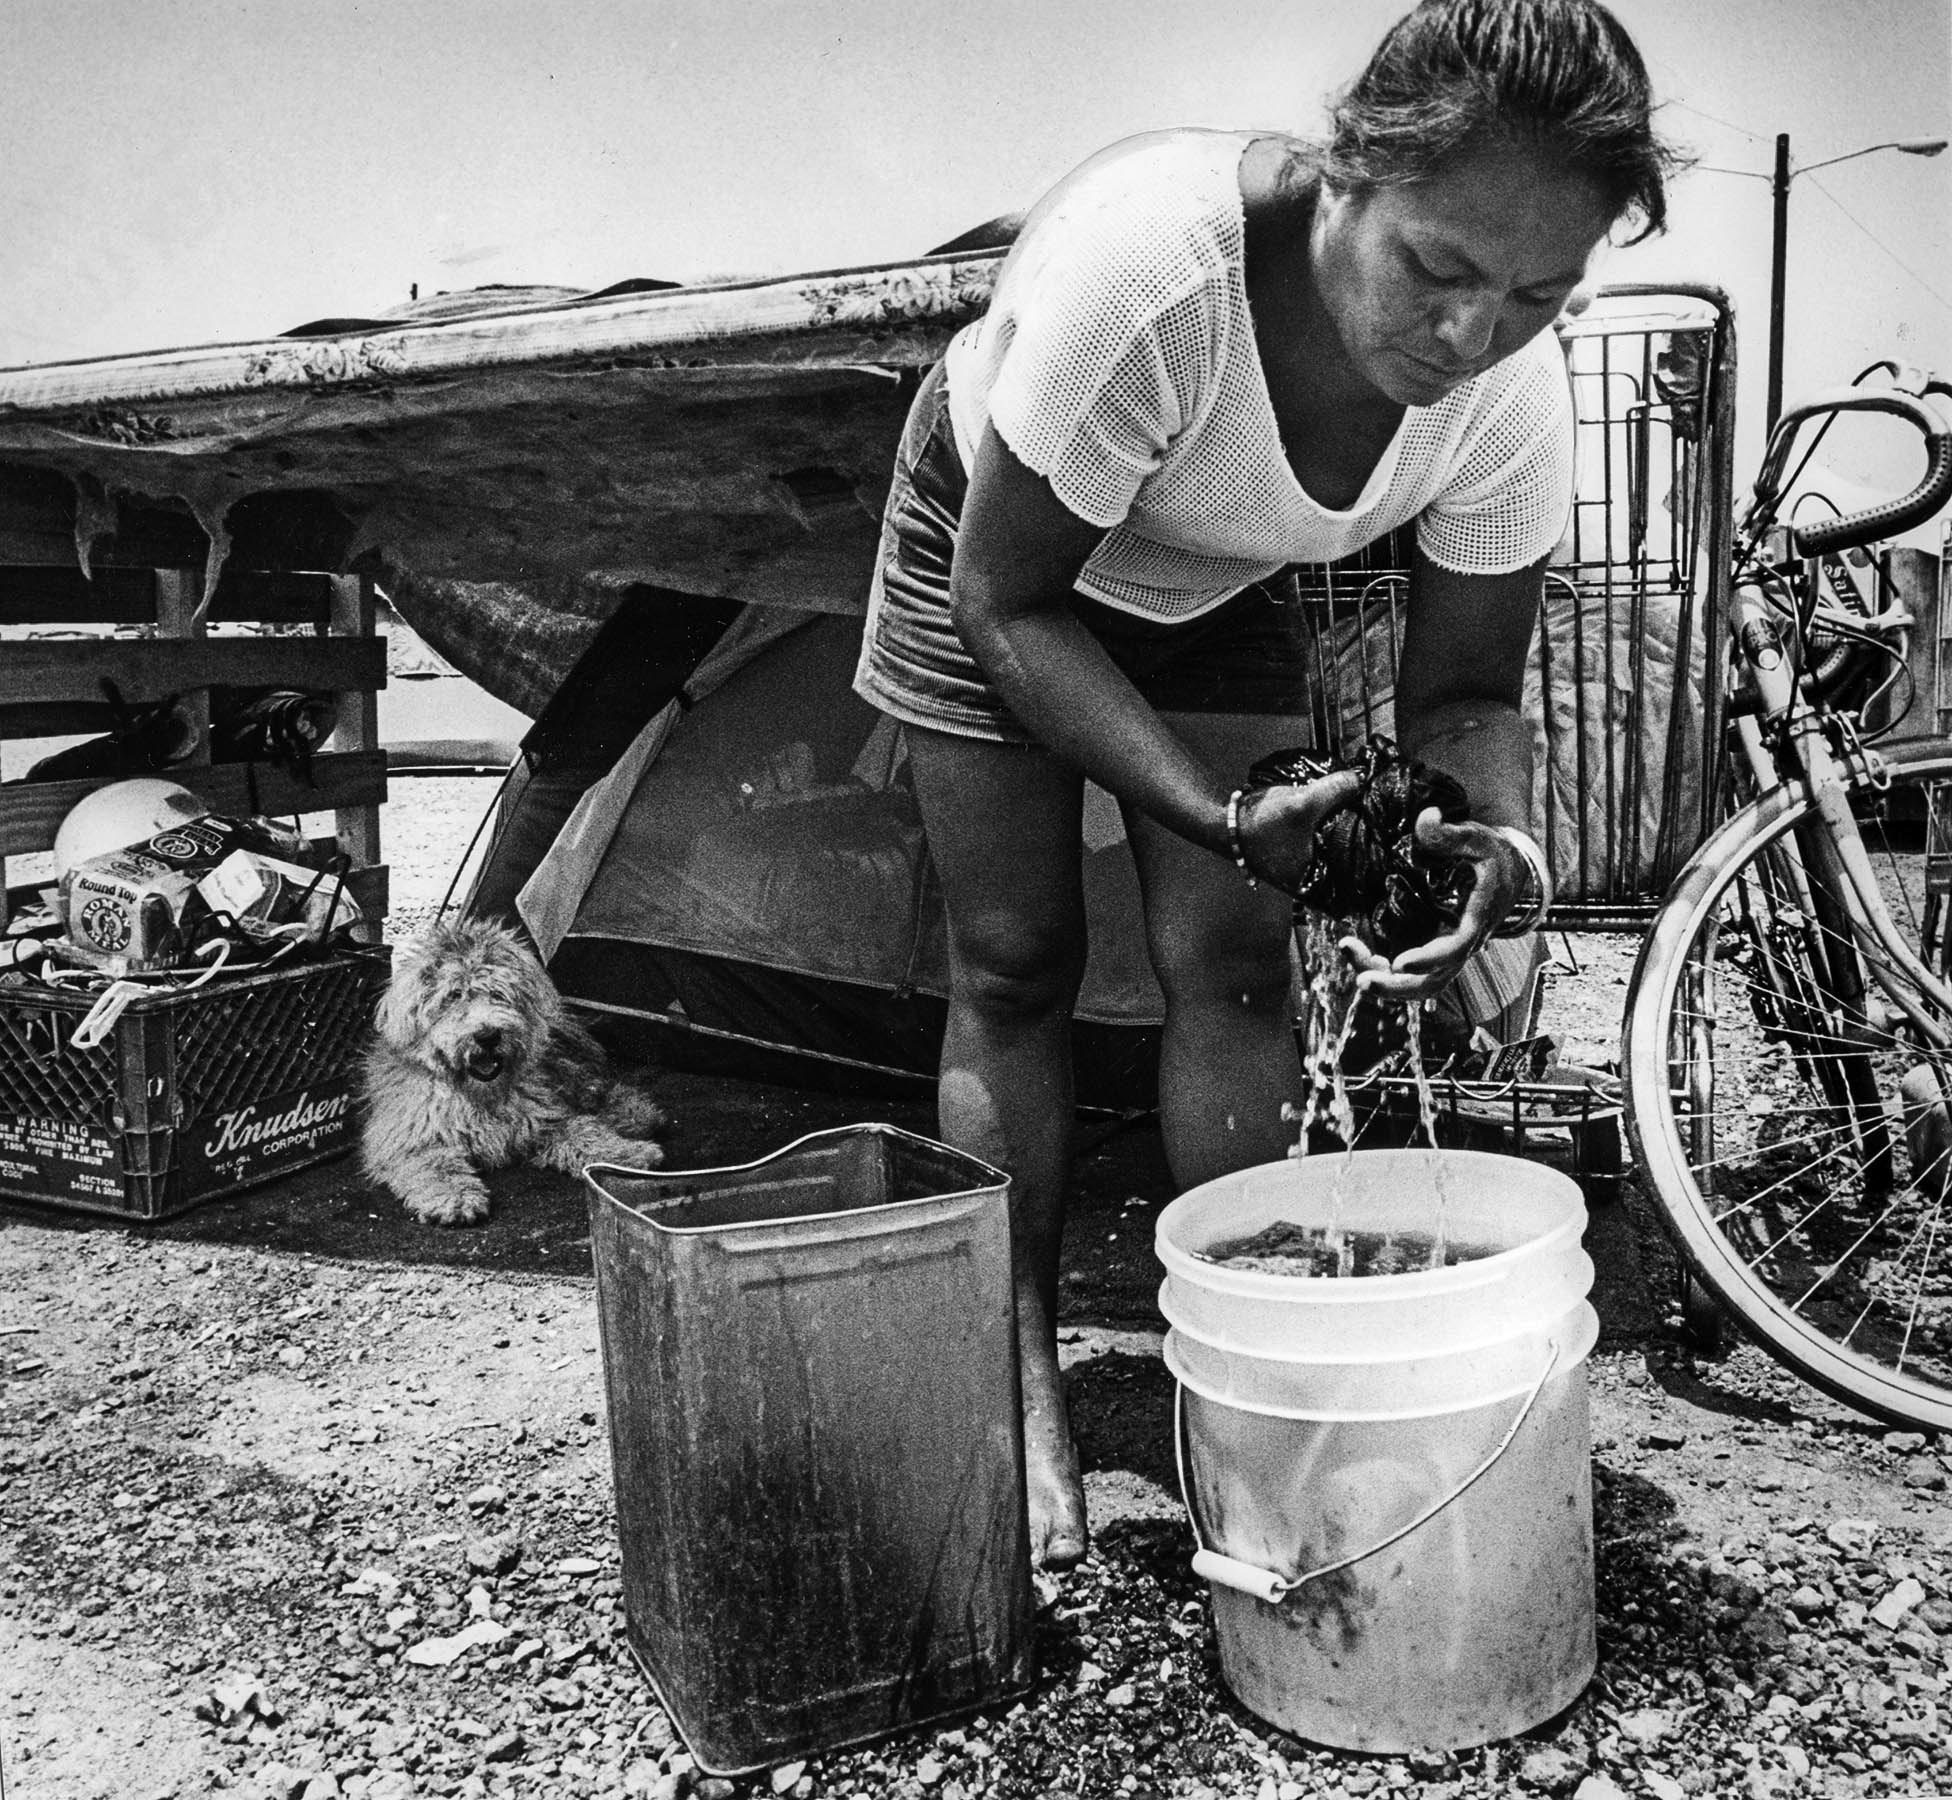 June 26, 1987: Esperanza Huerta washes clothes in front of tent while her dog Snowball takes it easy